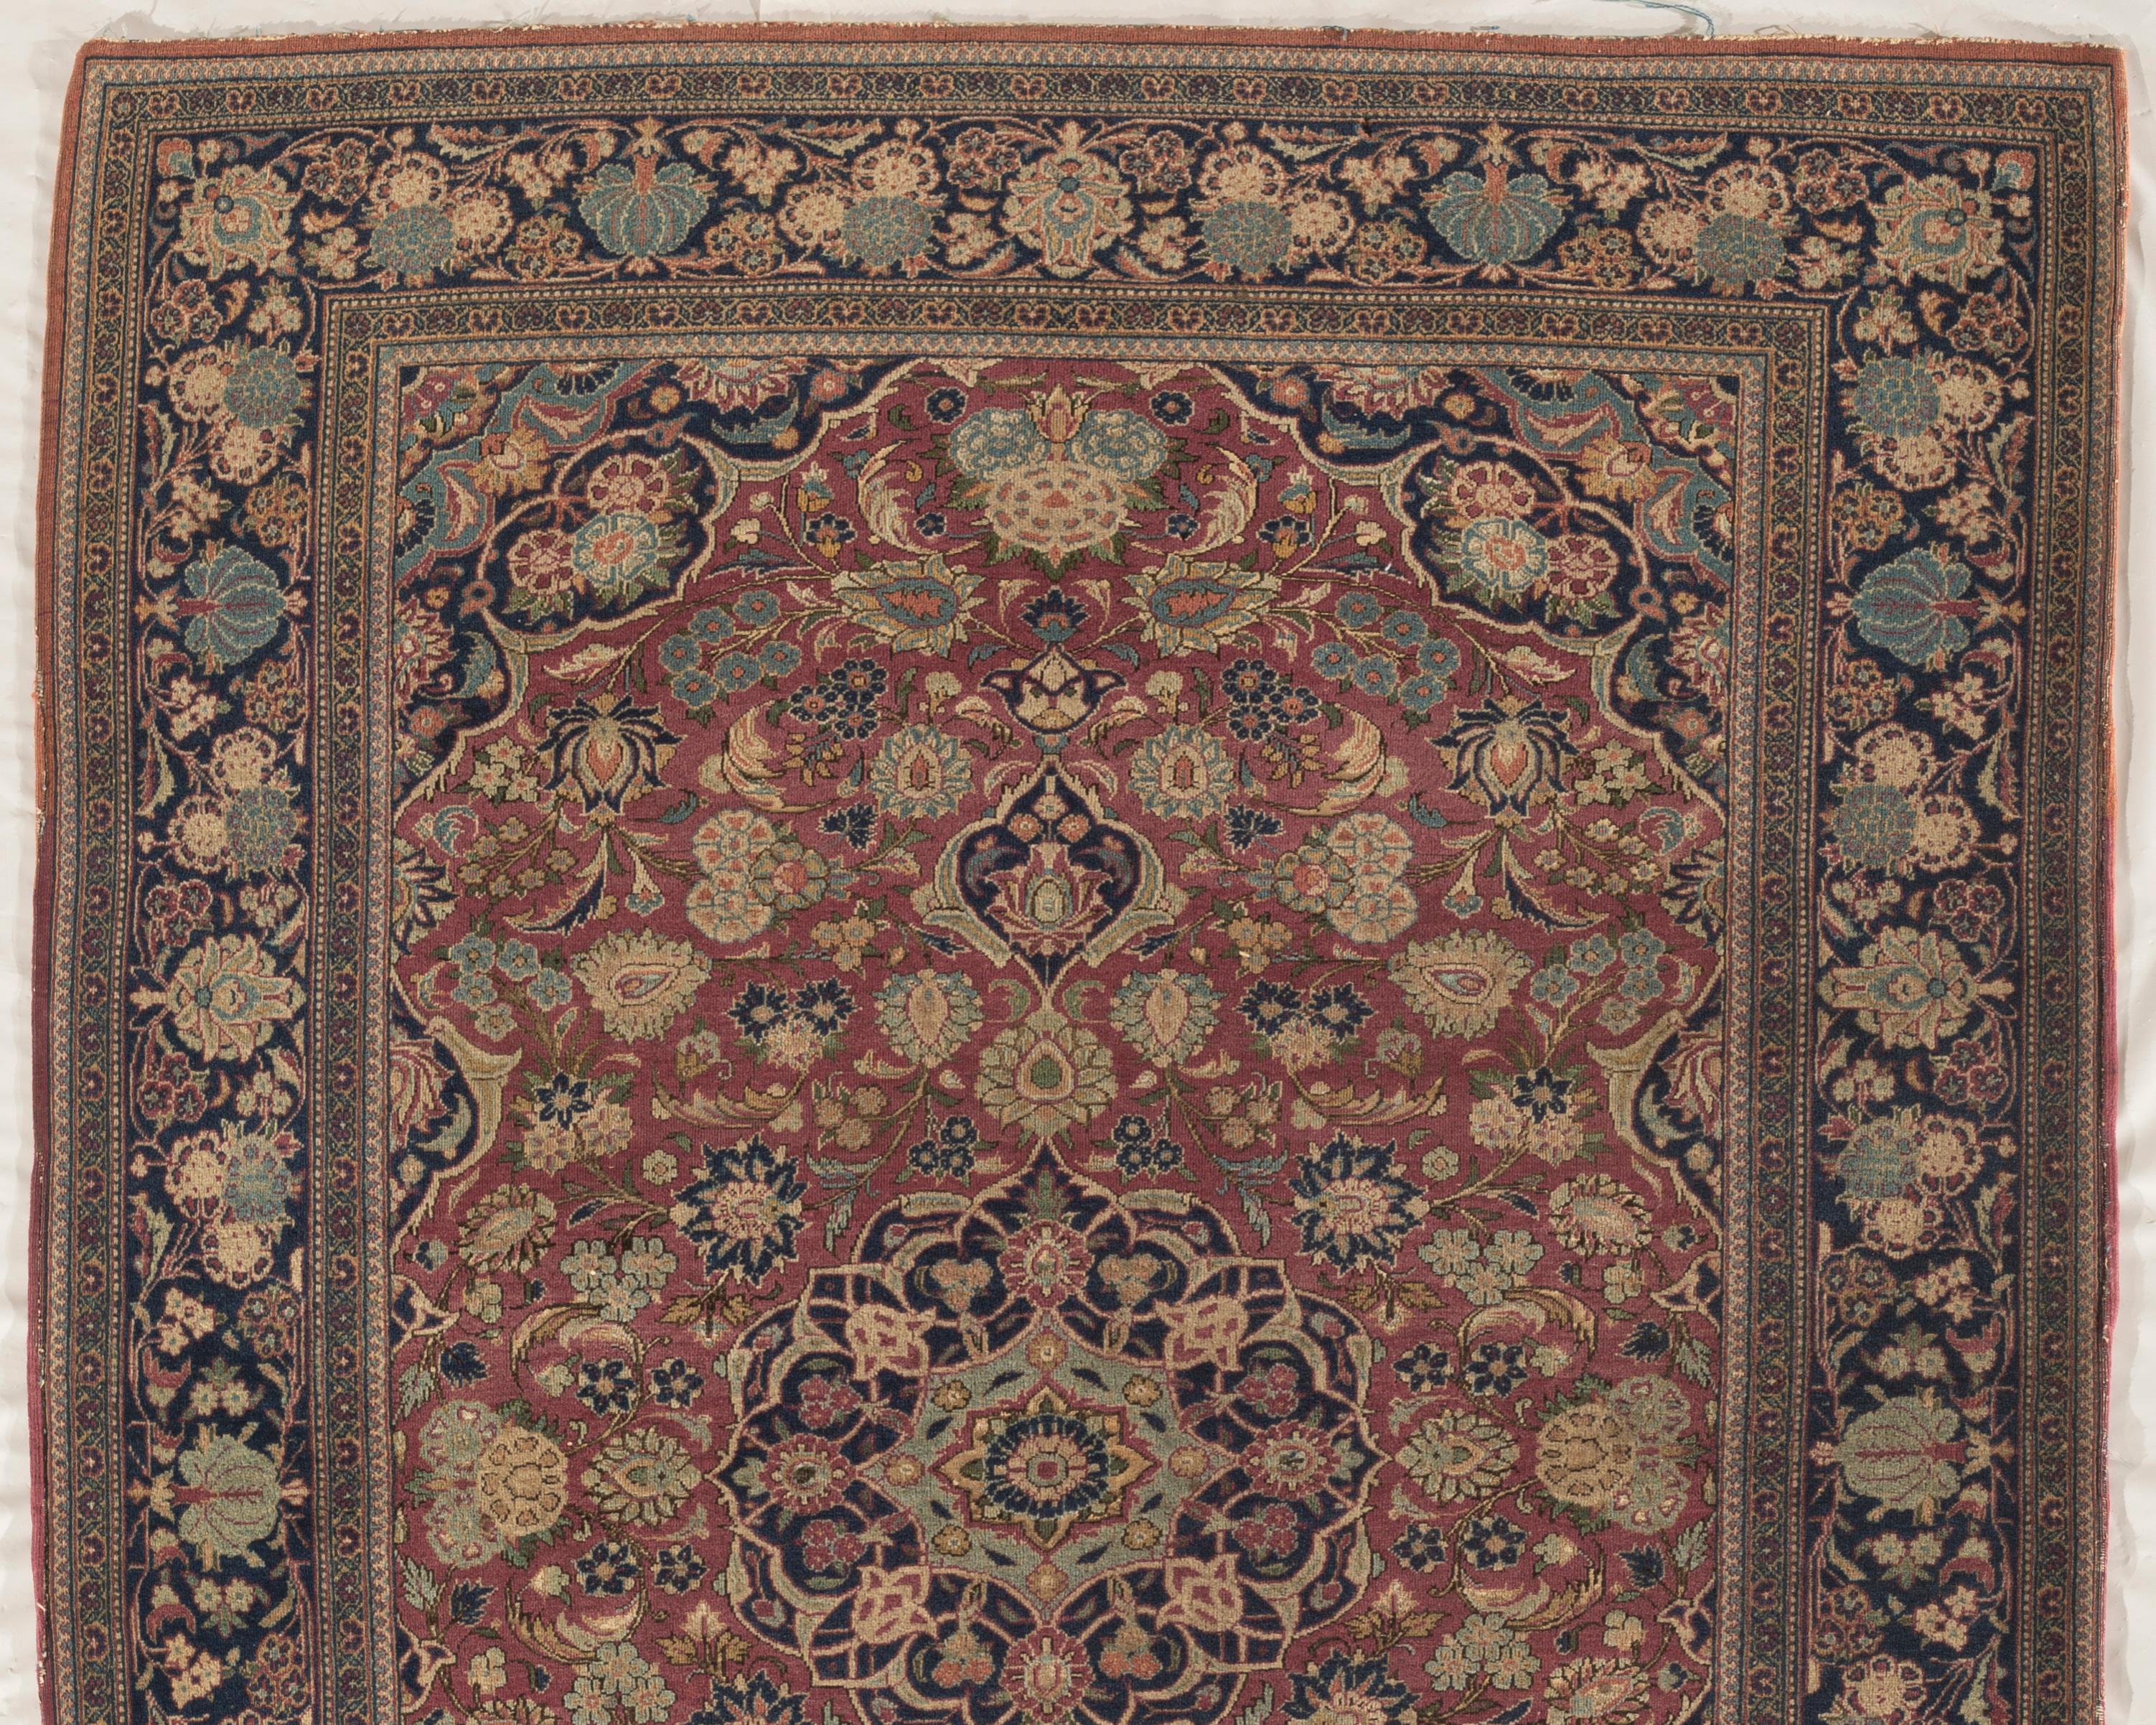 Antique Persian Isphahan rug, circa 1900. A lovely handwoven Persian Isphahan rug renowned for their superb artistry, craftsmanship, and excellent material, the rug has a medallion at the center on a red ground and stylized allover flower and vinery